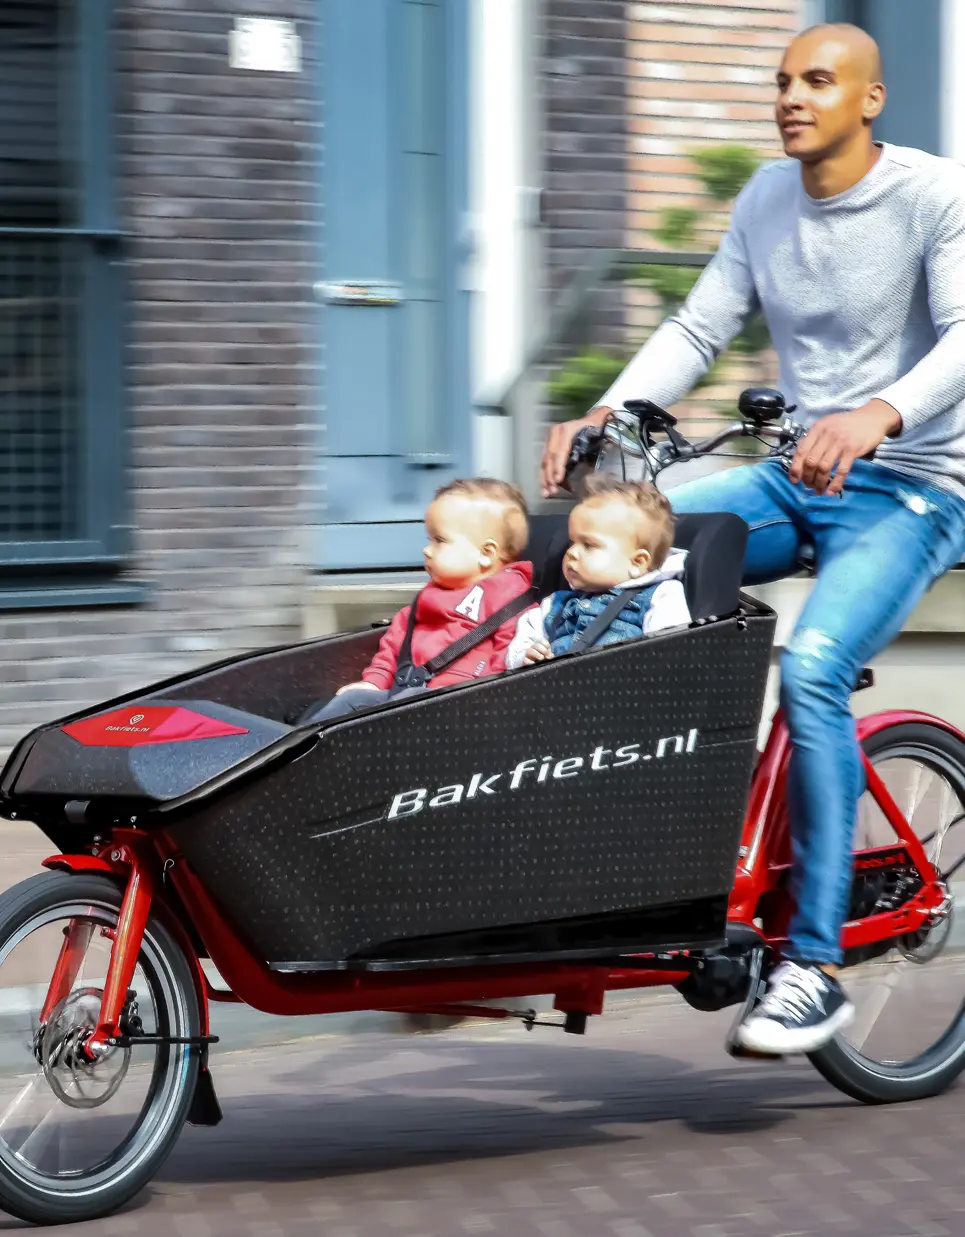 Create your bakfiets.nl